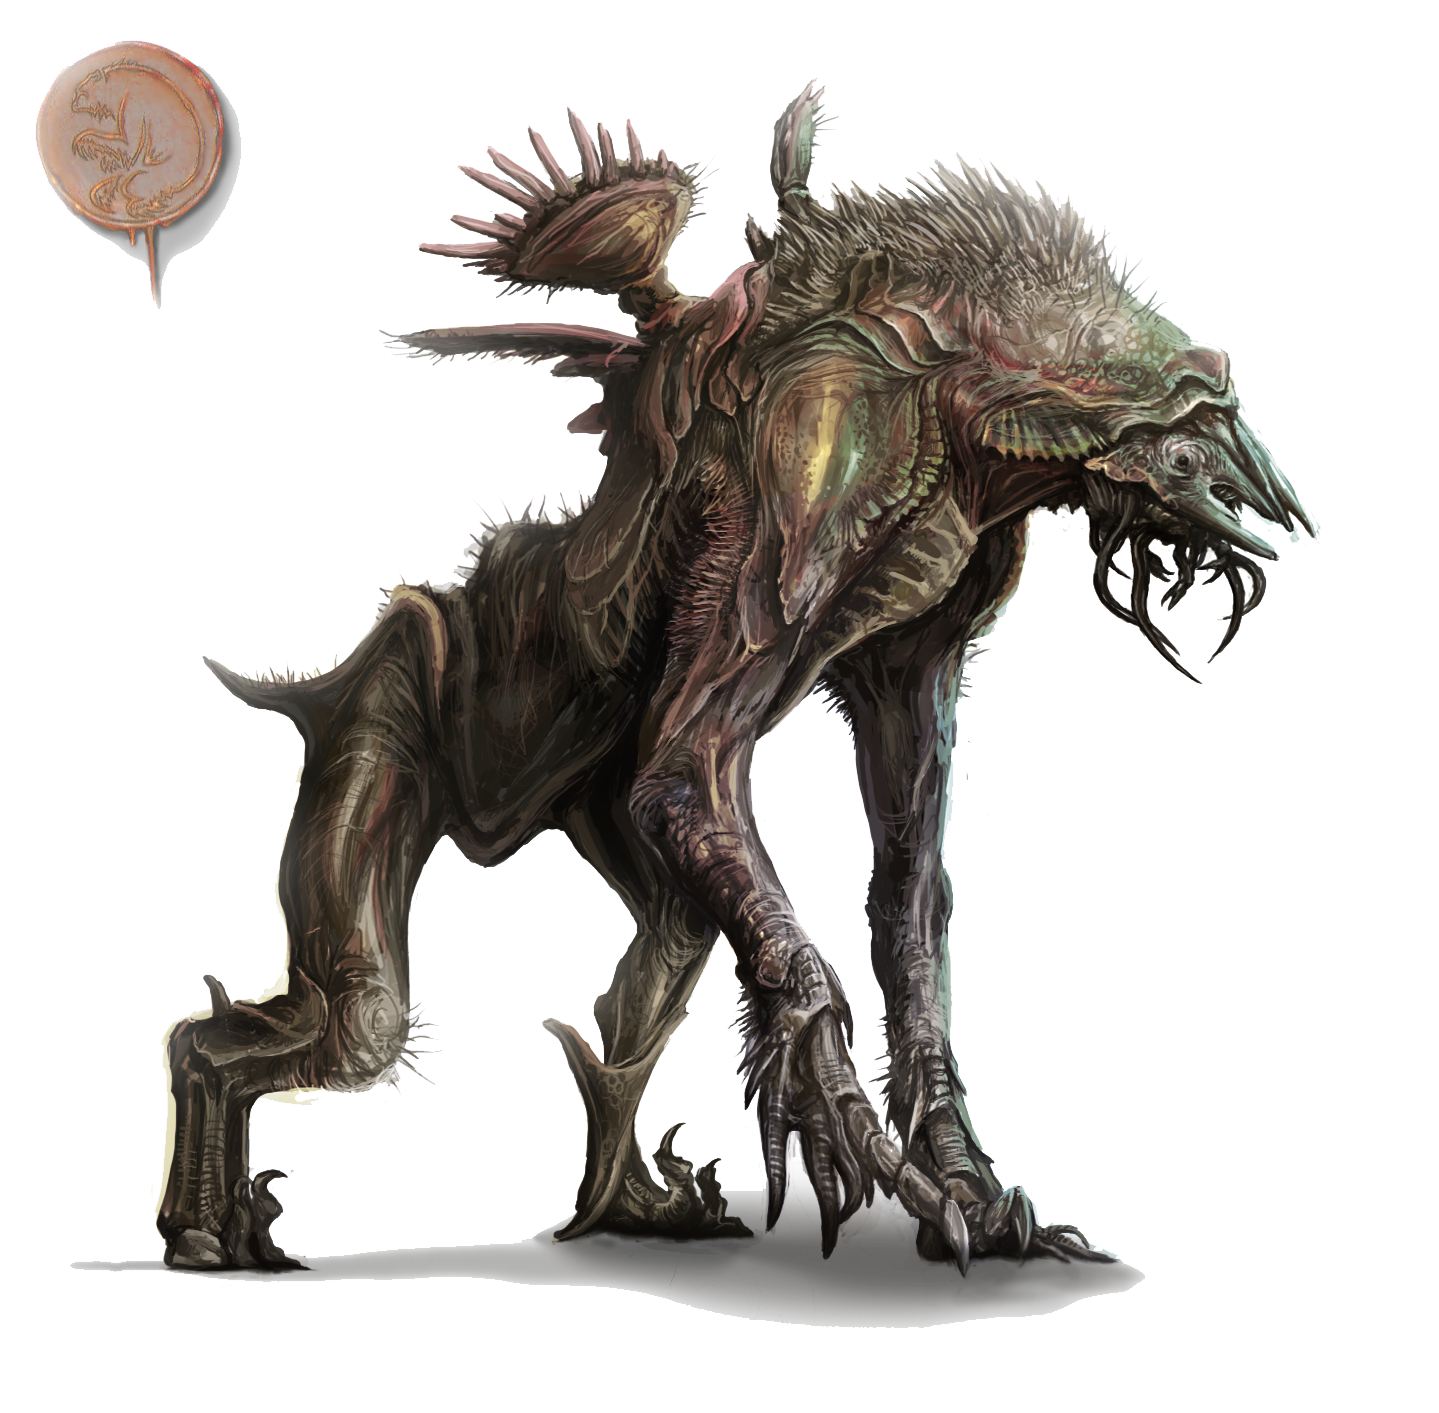 Creature Picture Png Image - Creature, Transparent background PNG HD thumbnail